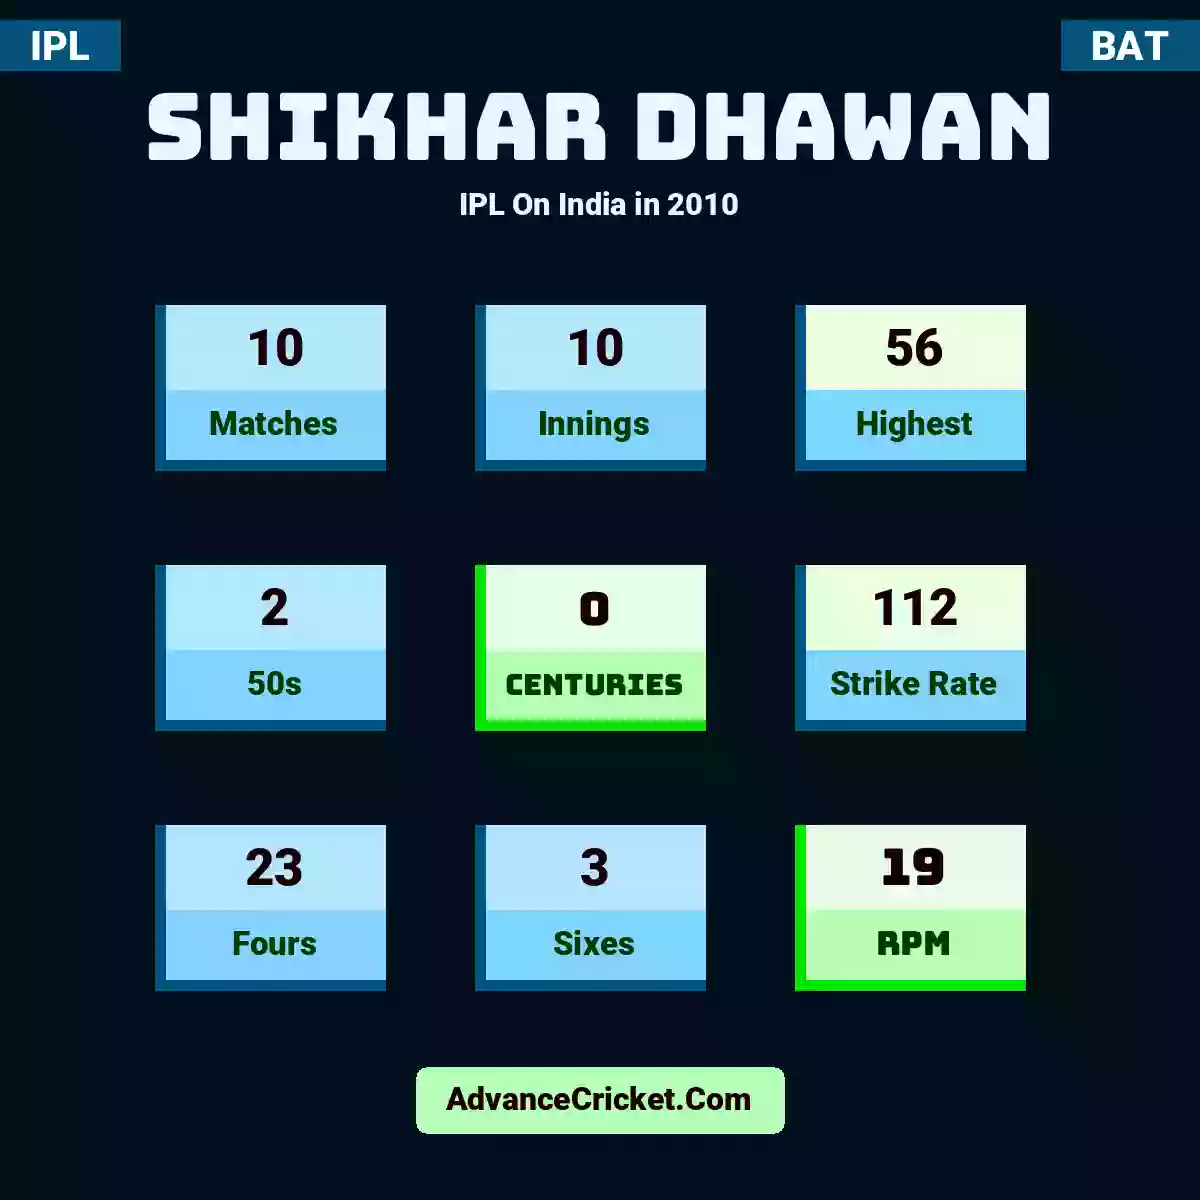 Shikhar Dhawan IPL  On India in 2010, Shikhar Dhawan played 10 matches, scored 56 runs as highest, 2 half-centuries, and 0 centuries, with a strike rate of 112. S.Dhawan hit 23 fours and 3 sixes, with an RPM of 19.